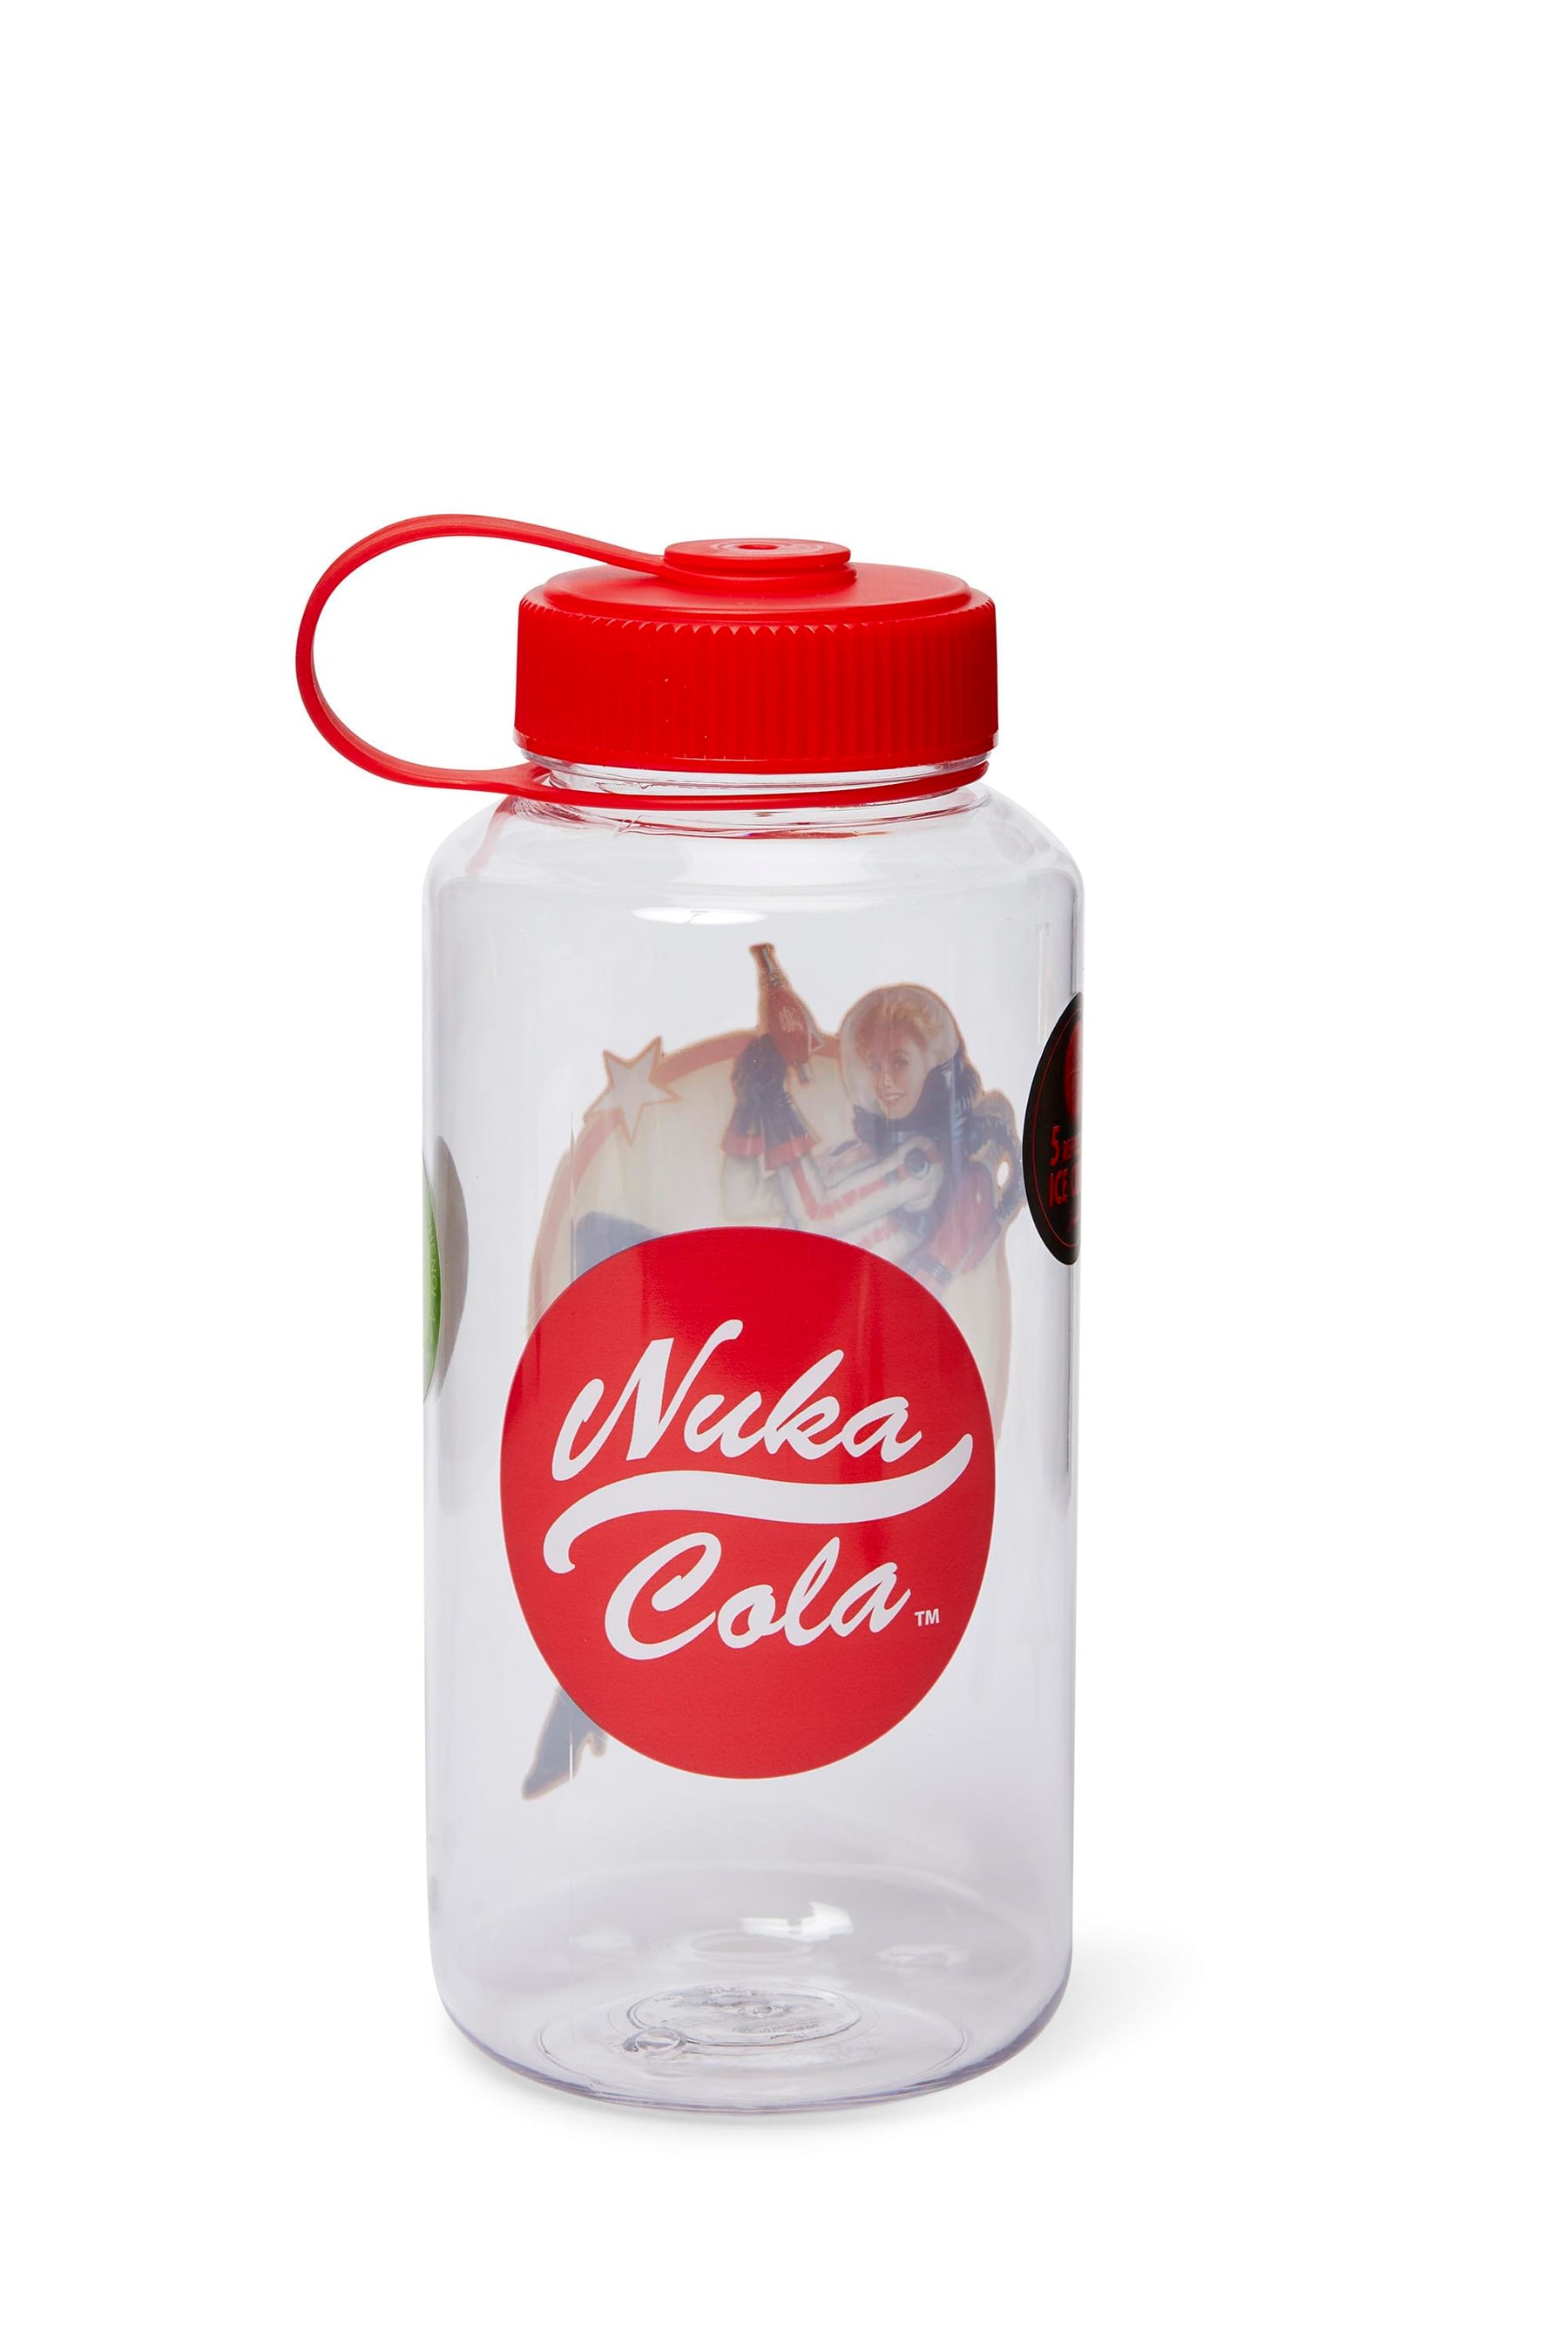 Fallout Nuka Cola Logo Plastic Water Bottle w/ Lid & Molded Ice Cubes - 34-Ounce